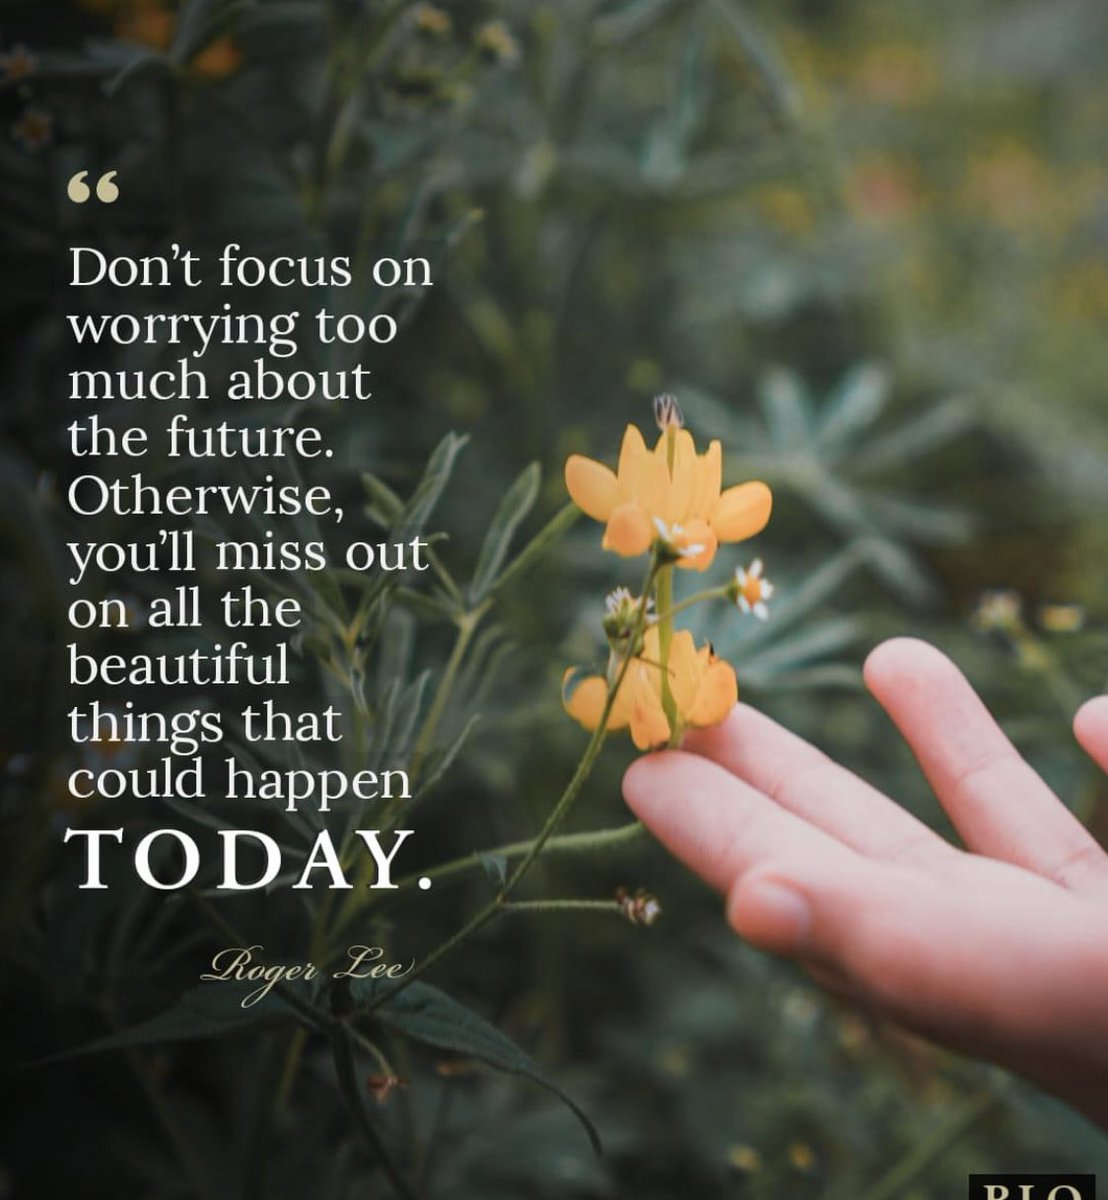 Don’t let worry about the future make you miss out on the beautiful things of today!